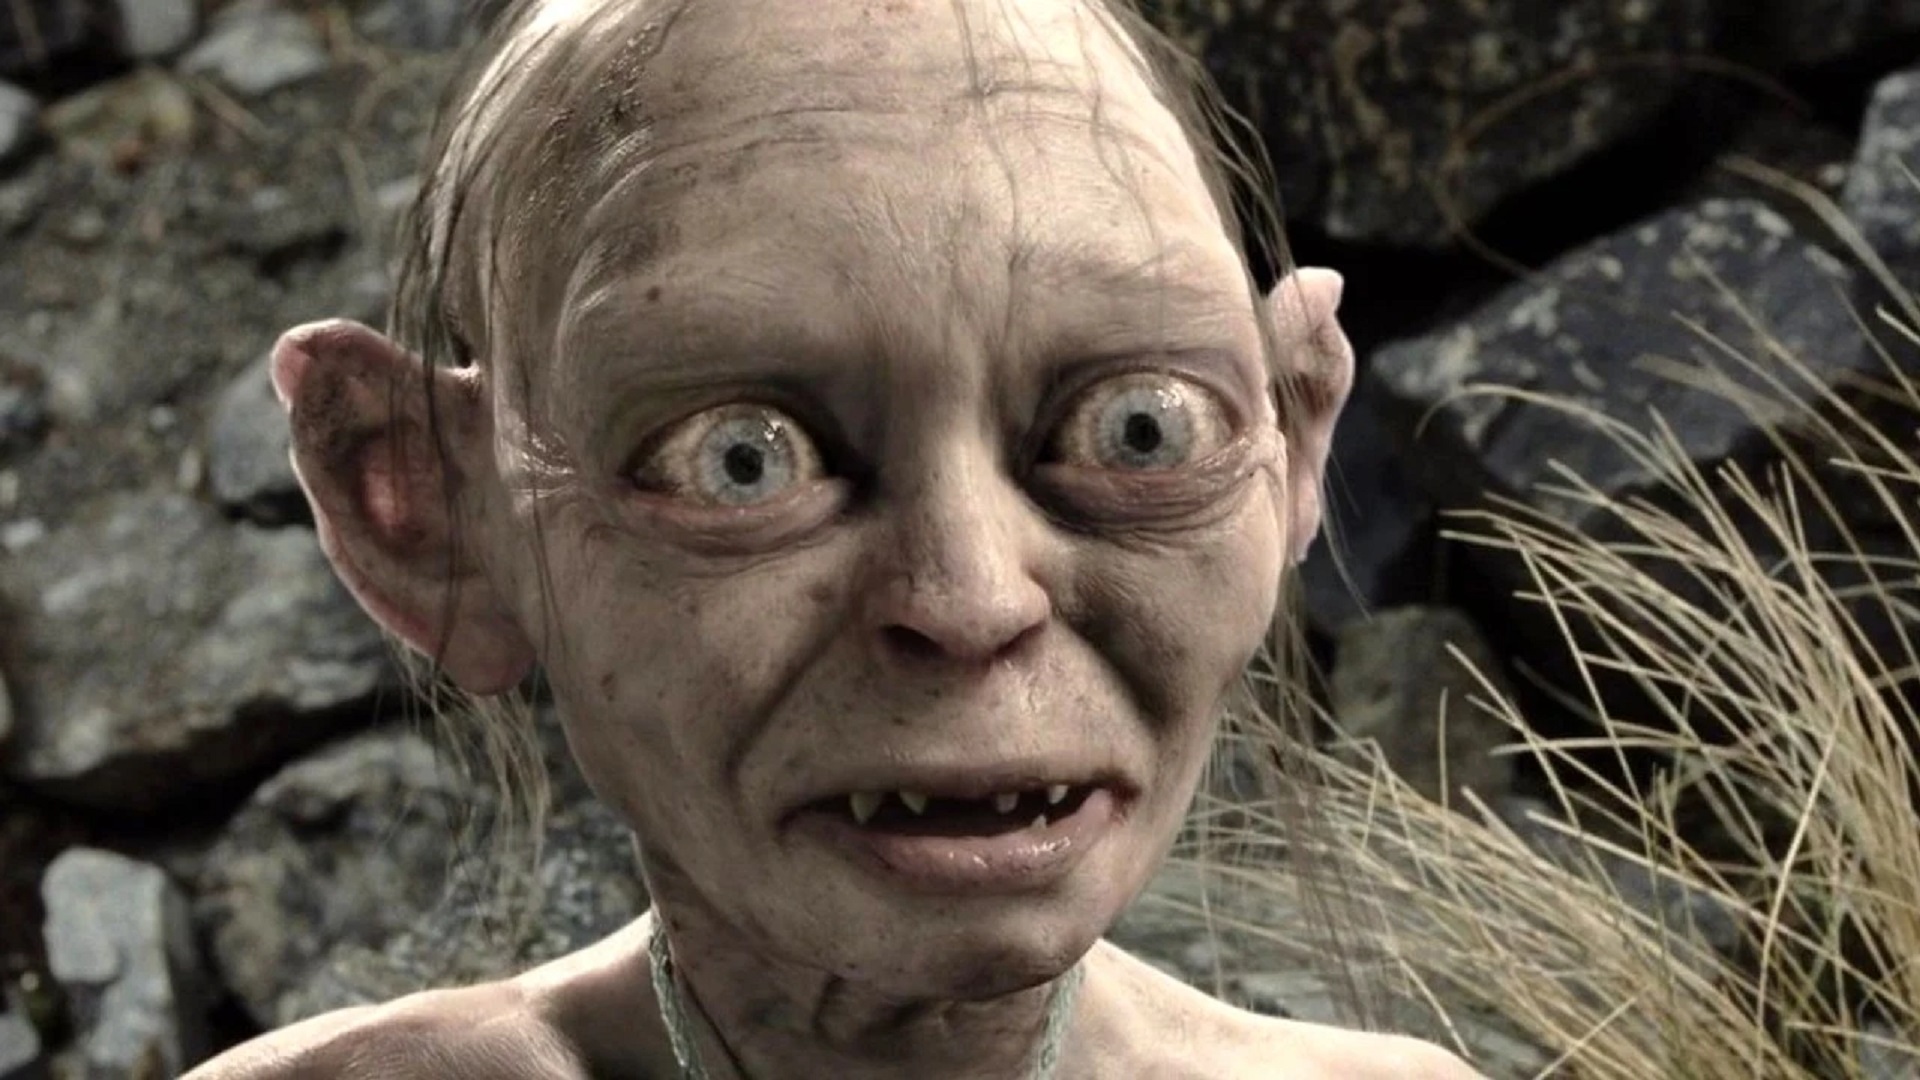 image of gollum from lord of the rings